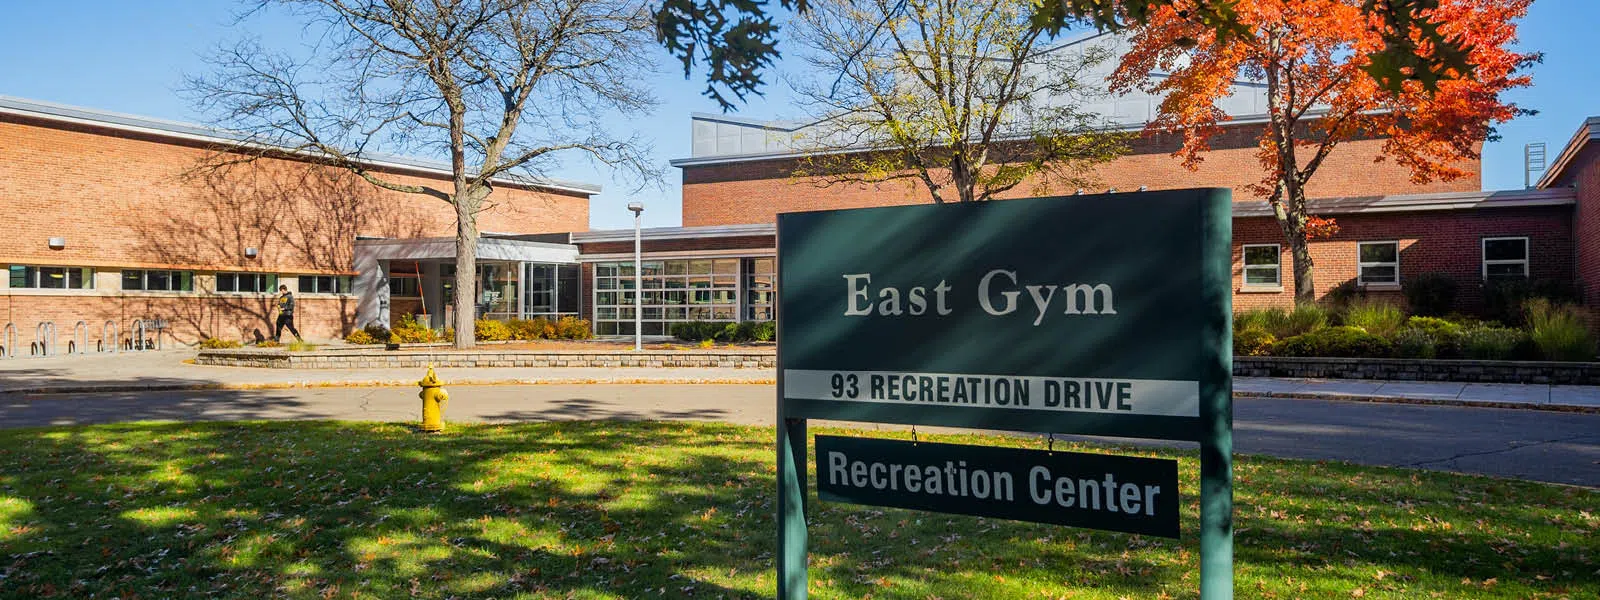 Entrance of East Gym